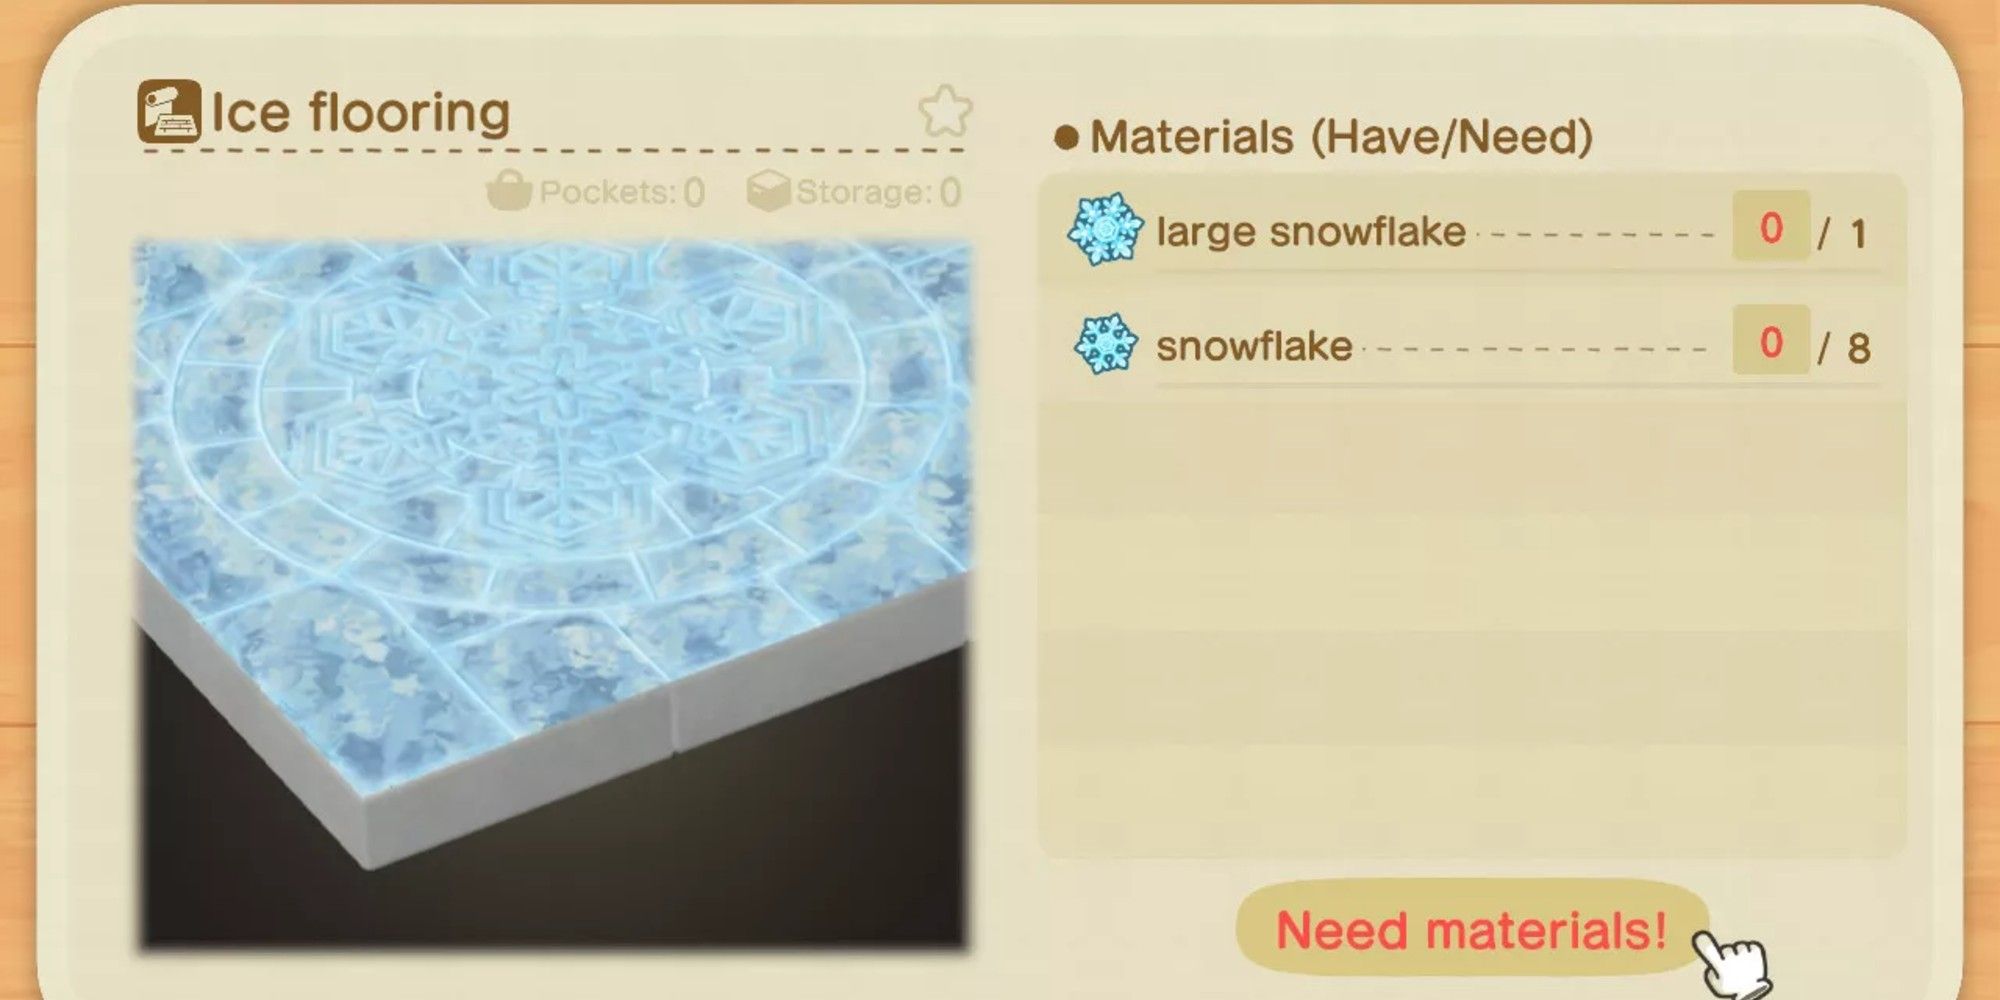 The recipe for DIY Ice Flooring in Animal Crossing: New Horizons